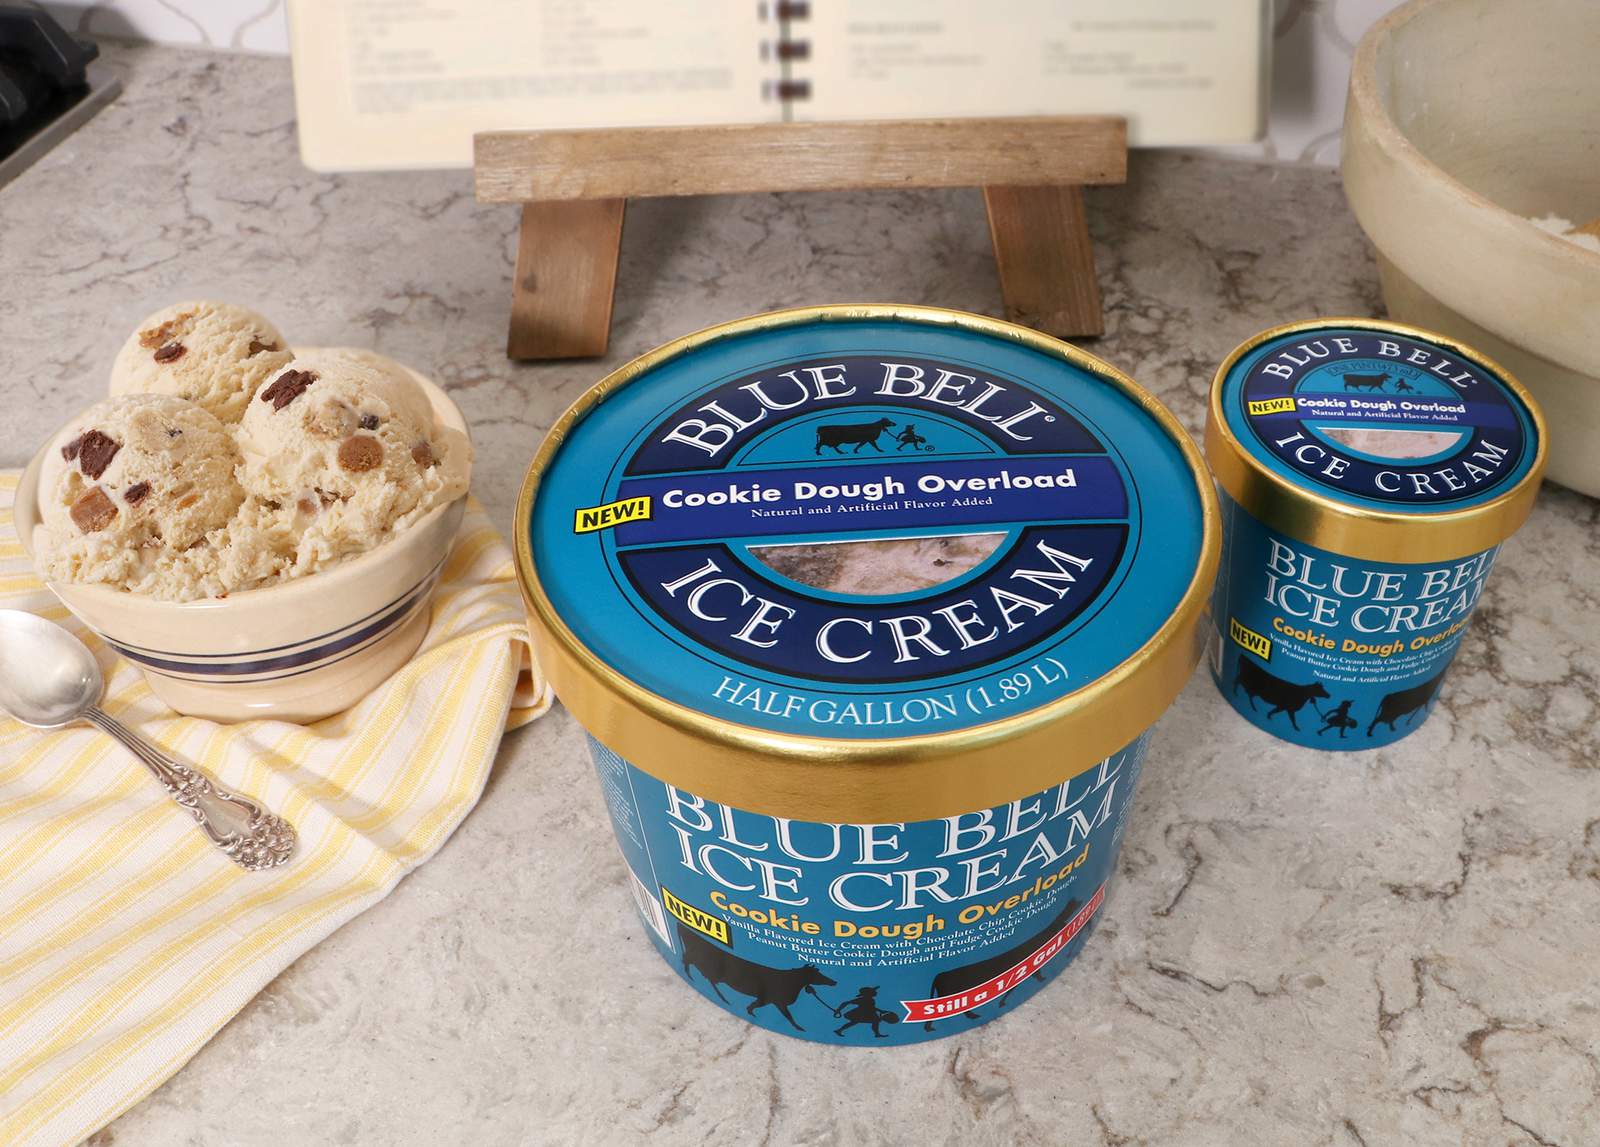 There’s an overload of cookie dough in Blue Bell’s newest ice cream flavor